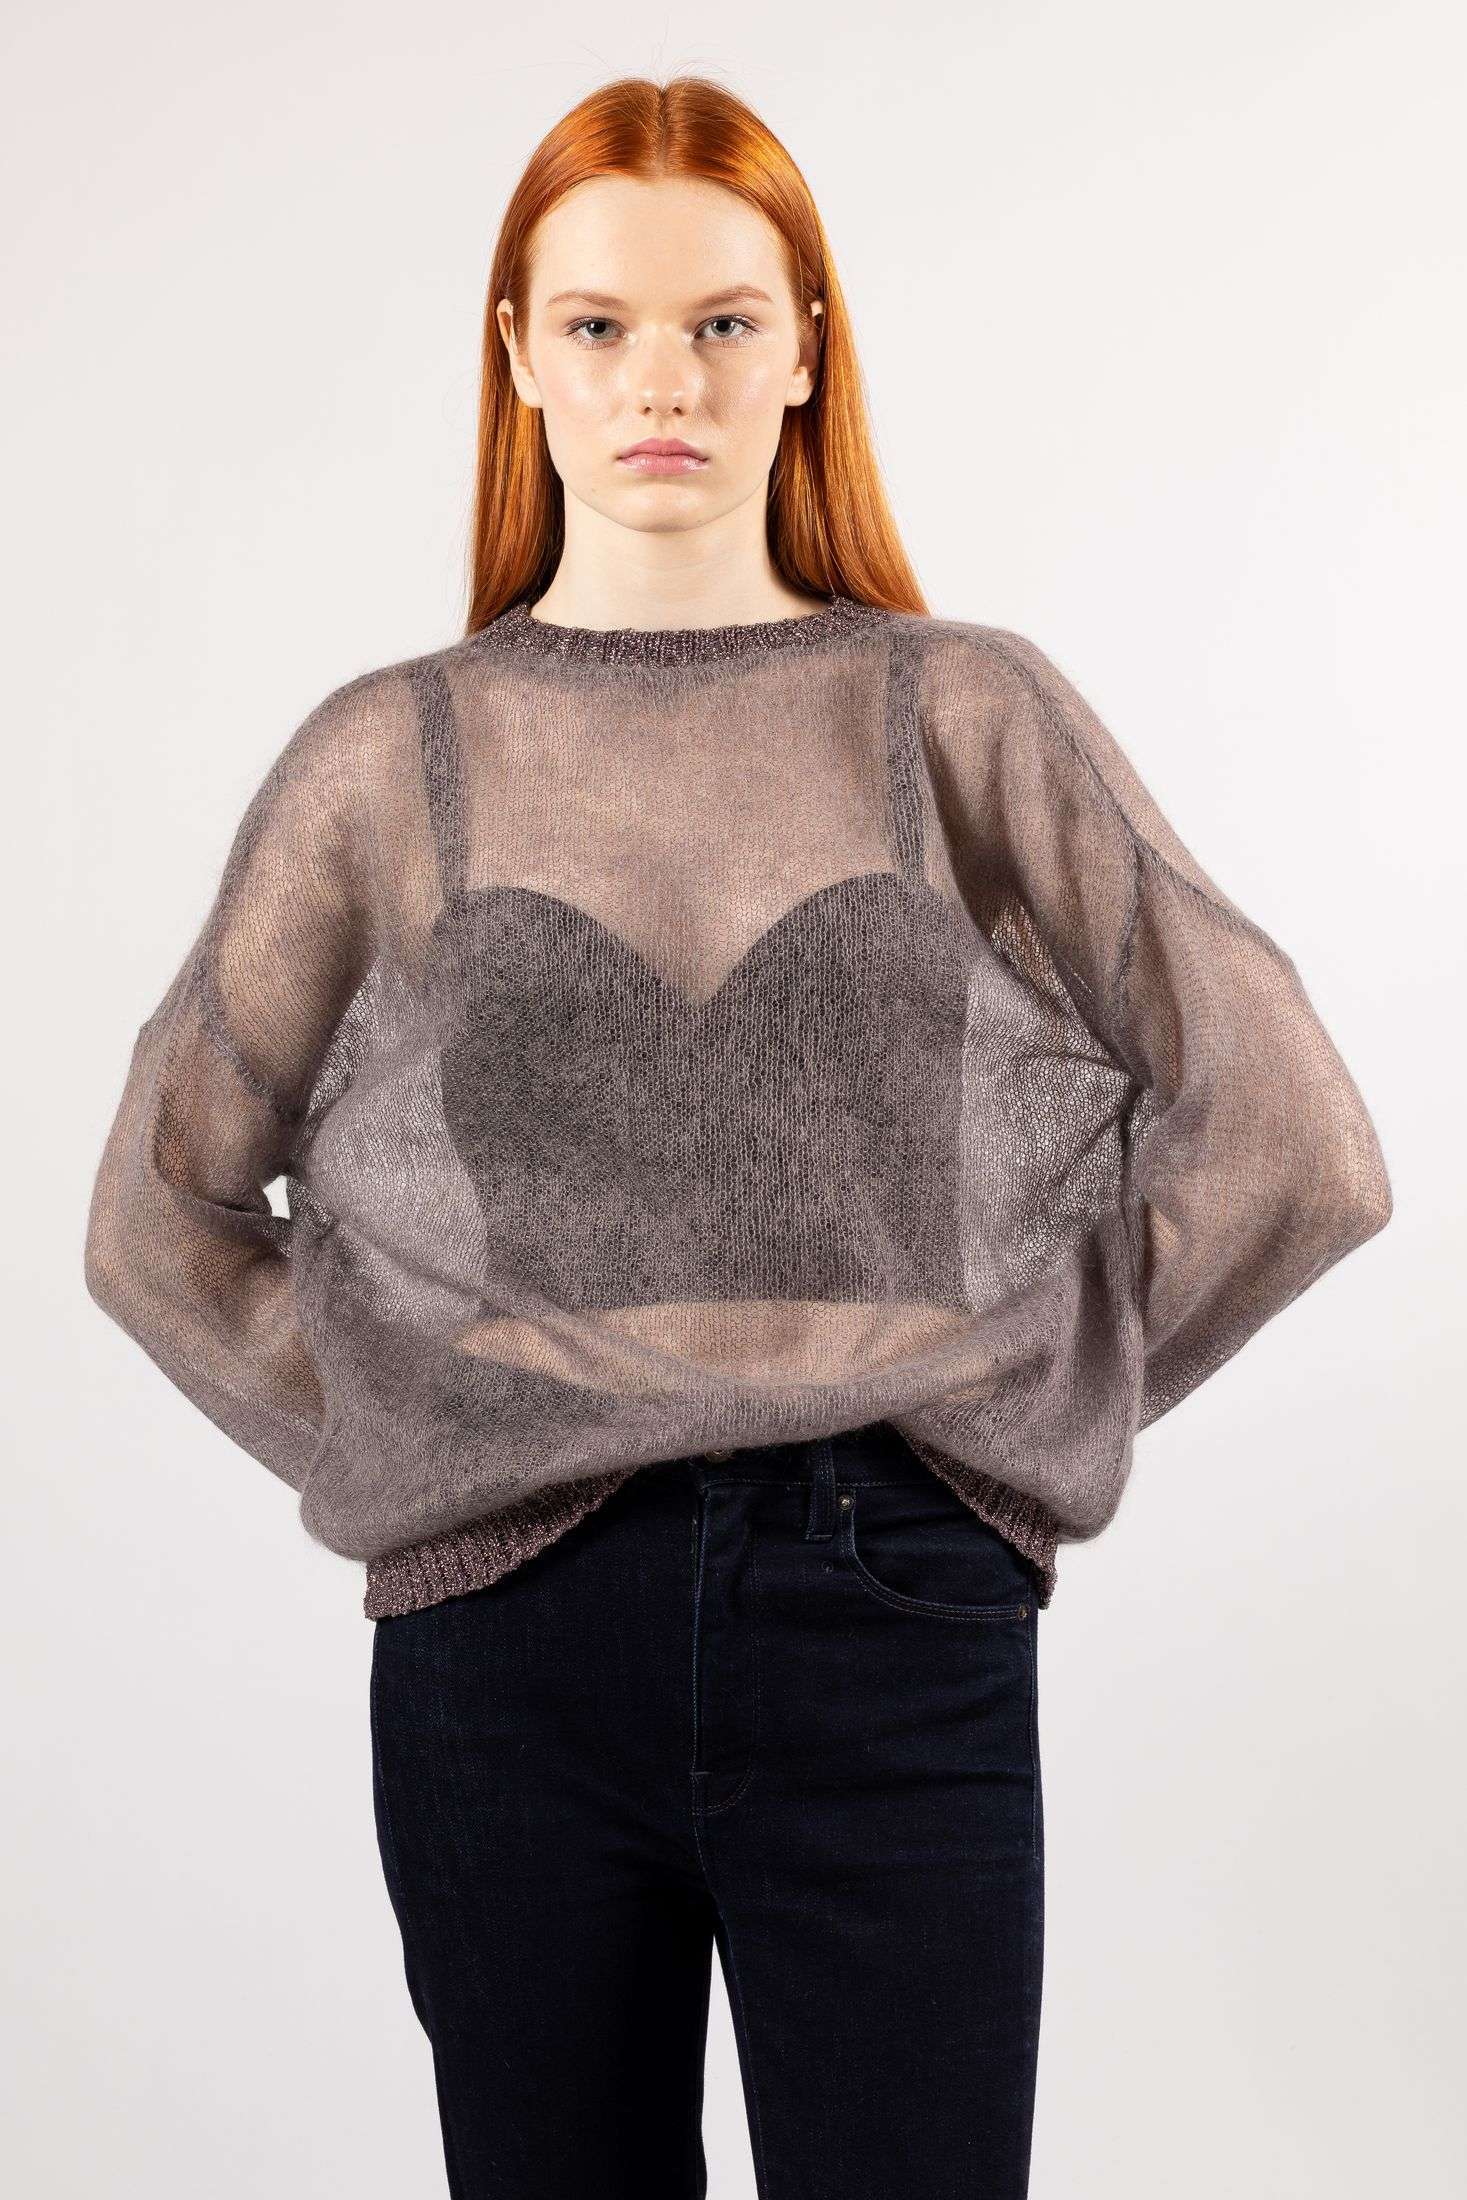 Luna: Embrace warmth and elegance in a brown mohair sweater with transparent knit.